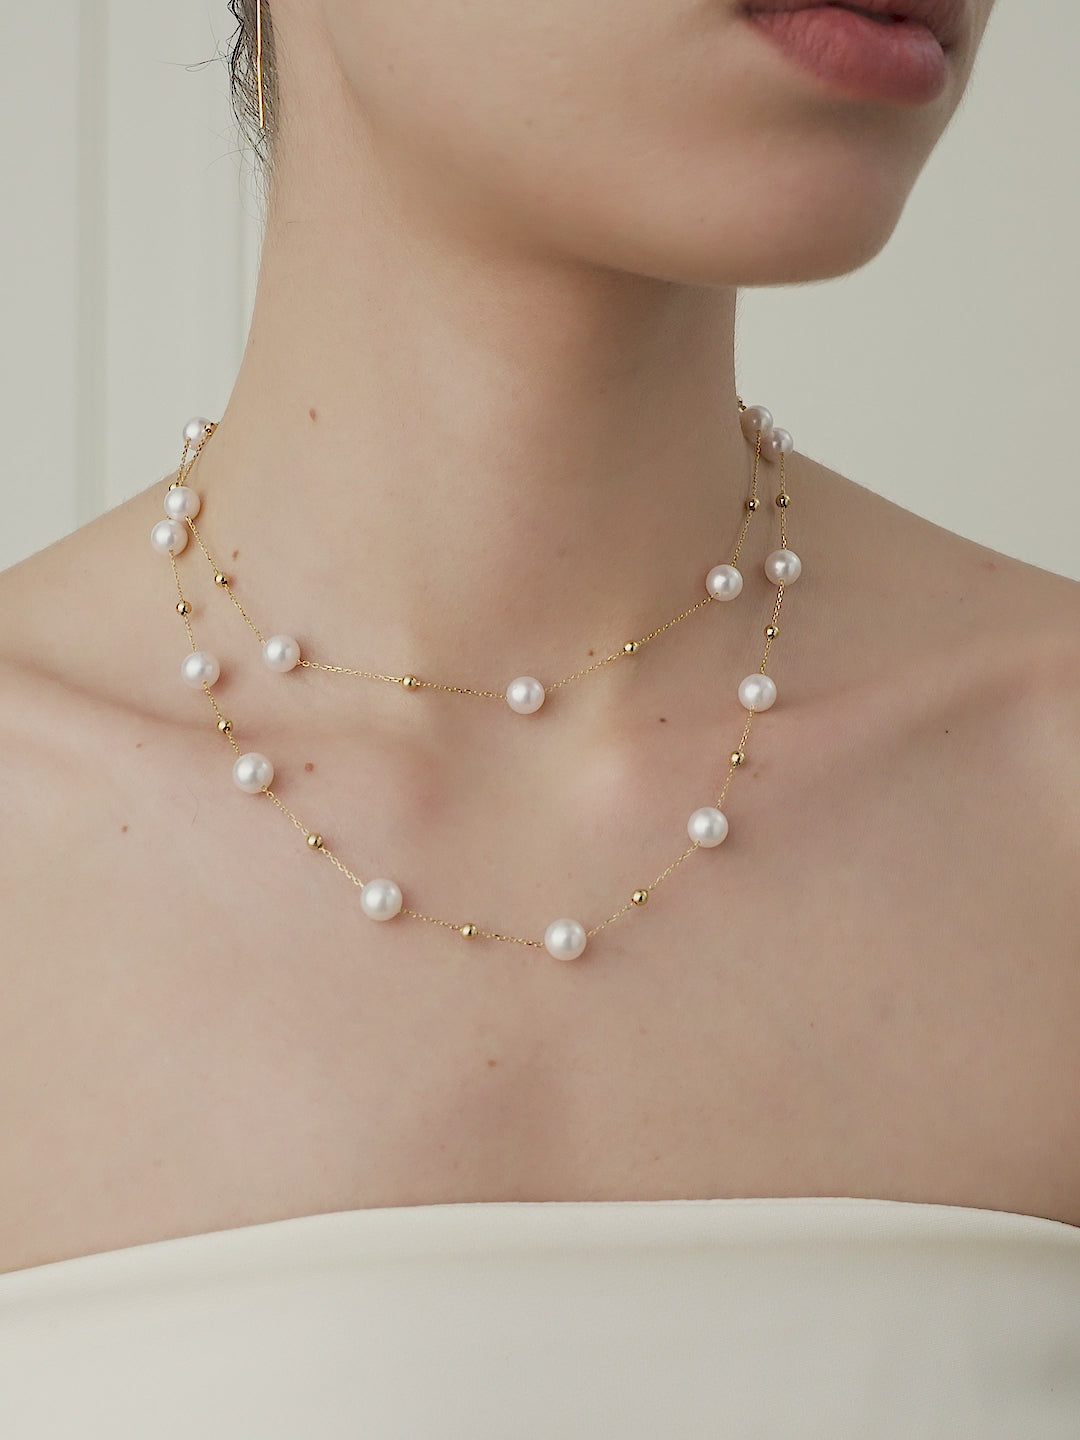 Akoya Pearl 18K Gold Baby's Breath Necklace